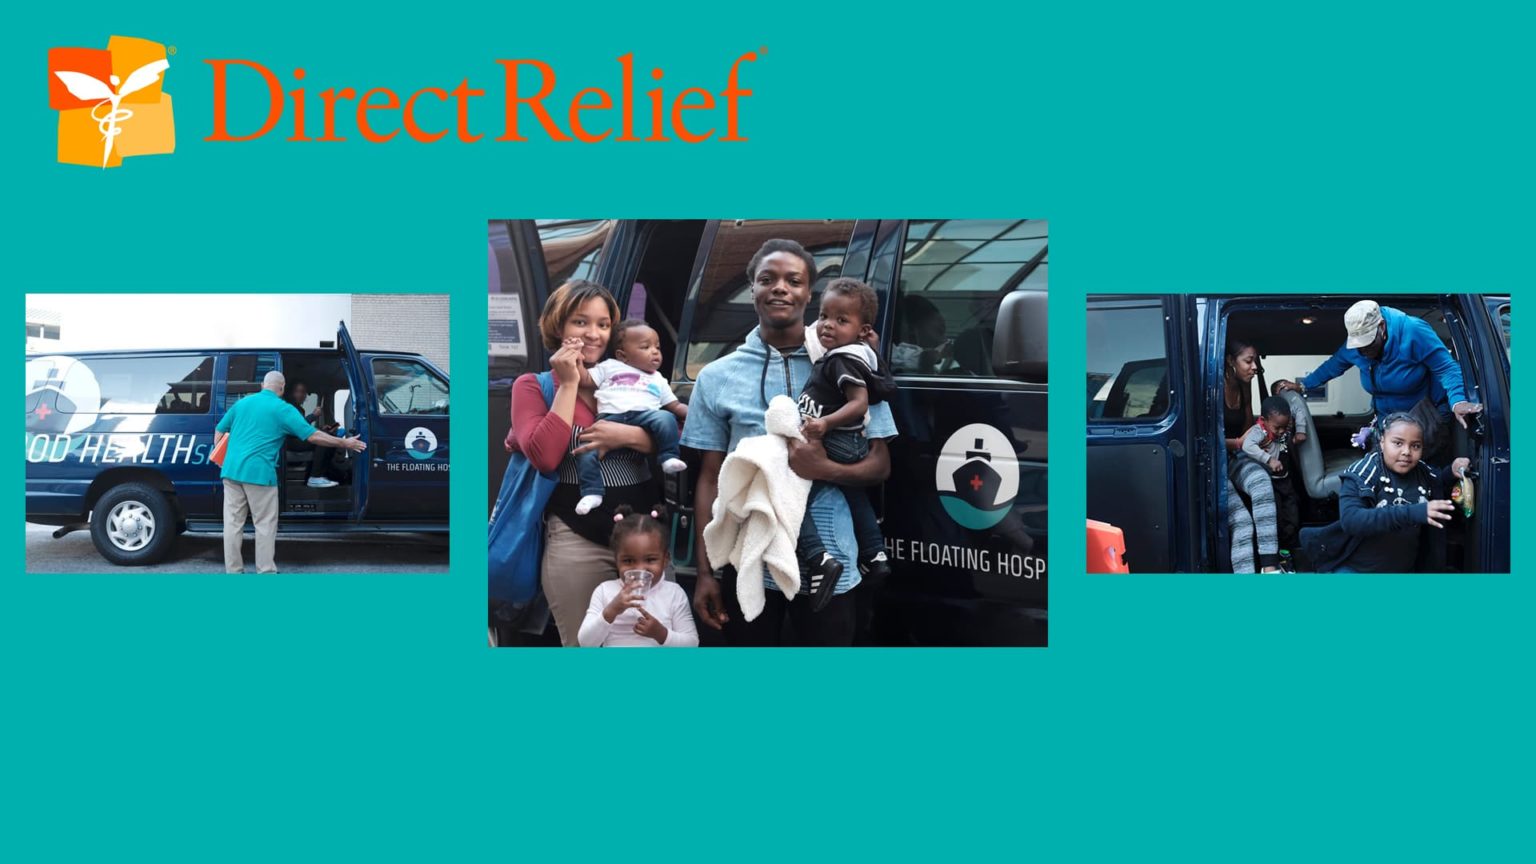 featured image for direct relief blog post